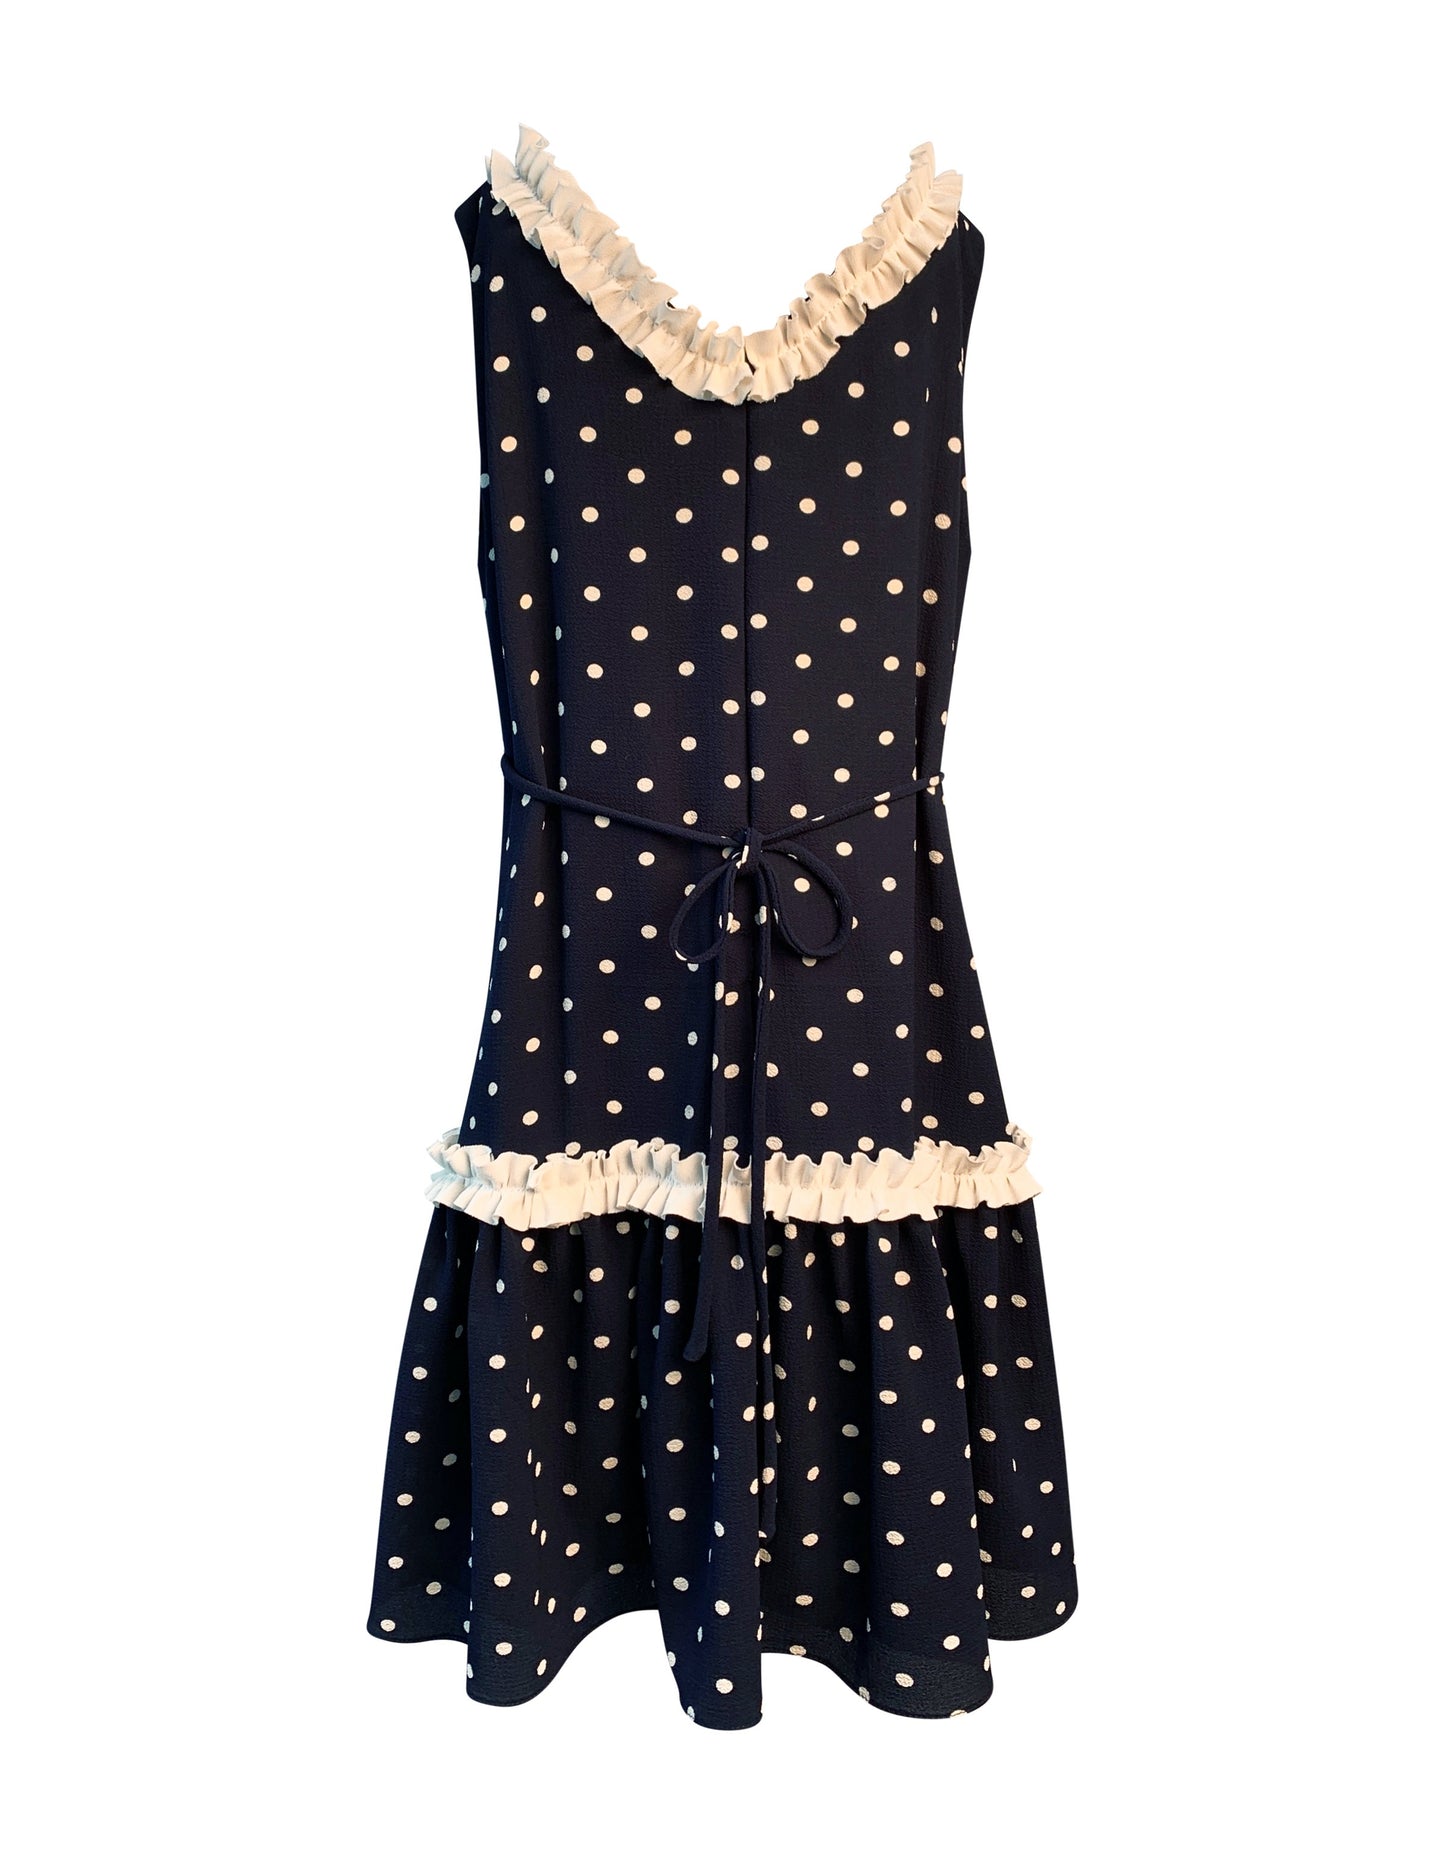 Helena and Harry Girl's Navy with White Dots and Ruffles Dress